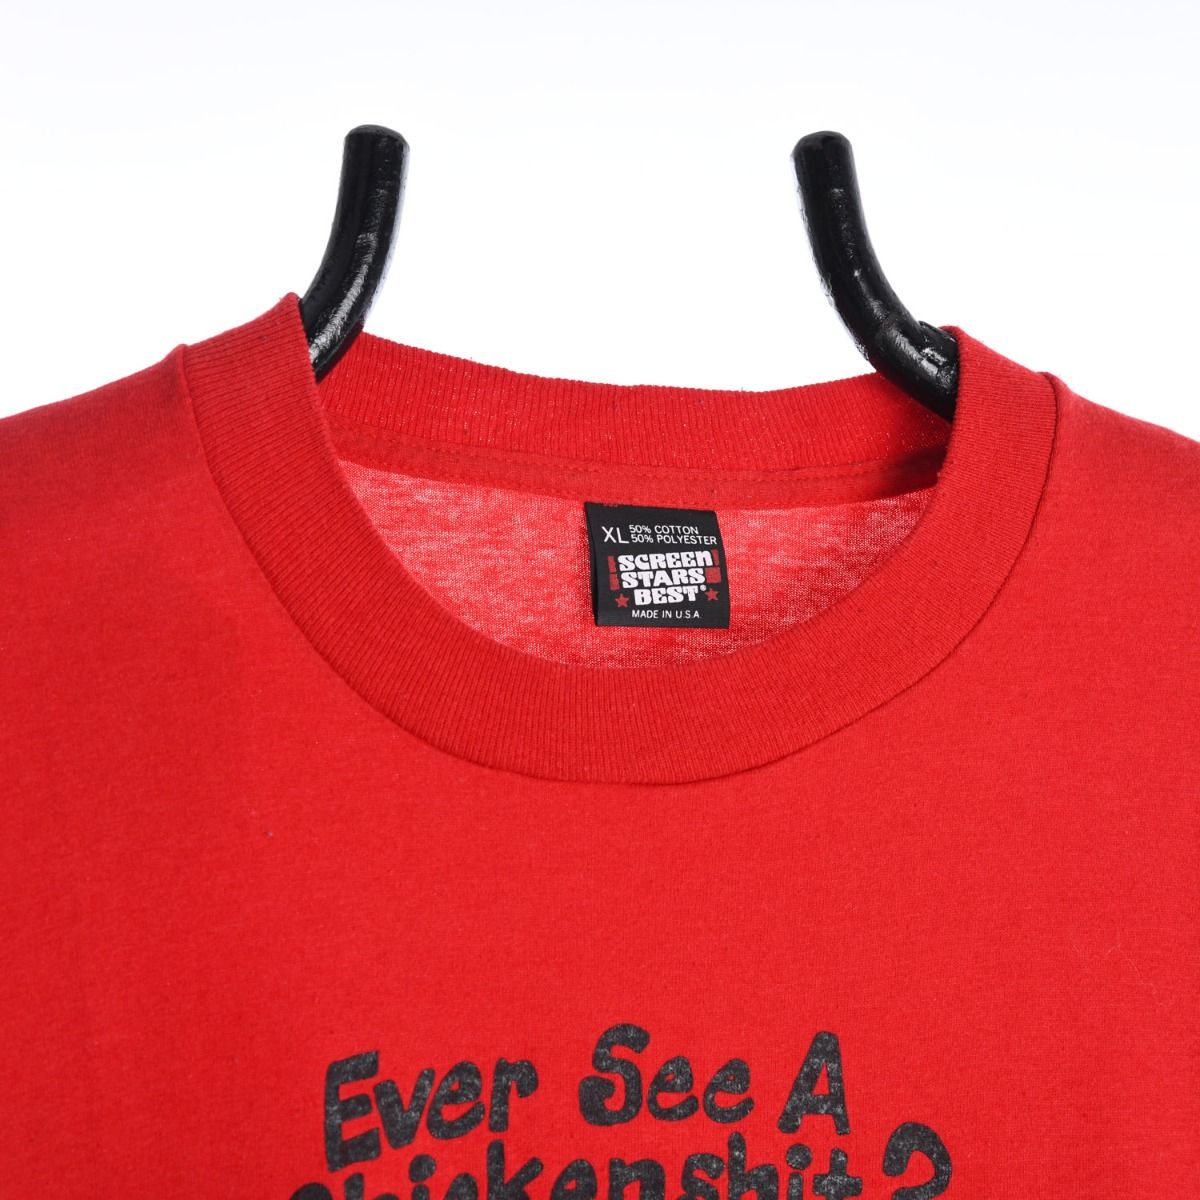 'Ever See A Chickenshit?' 1990s T-Shirt